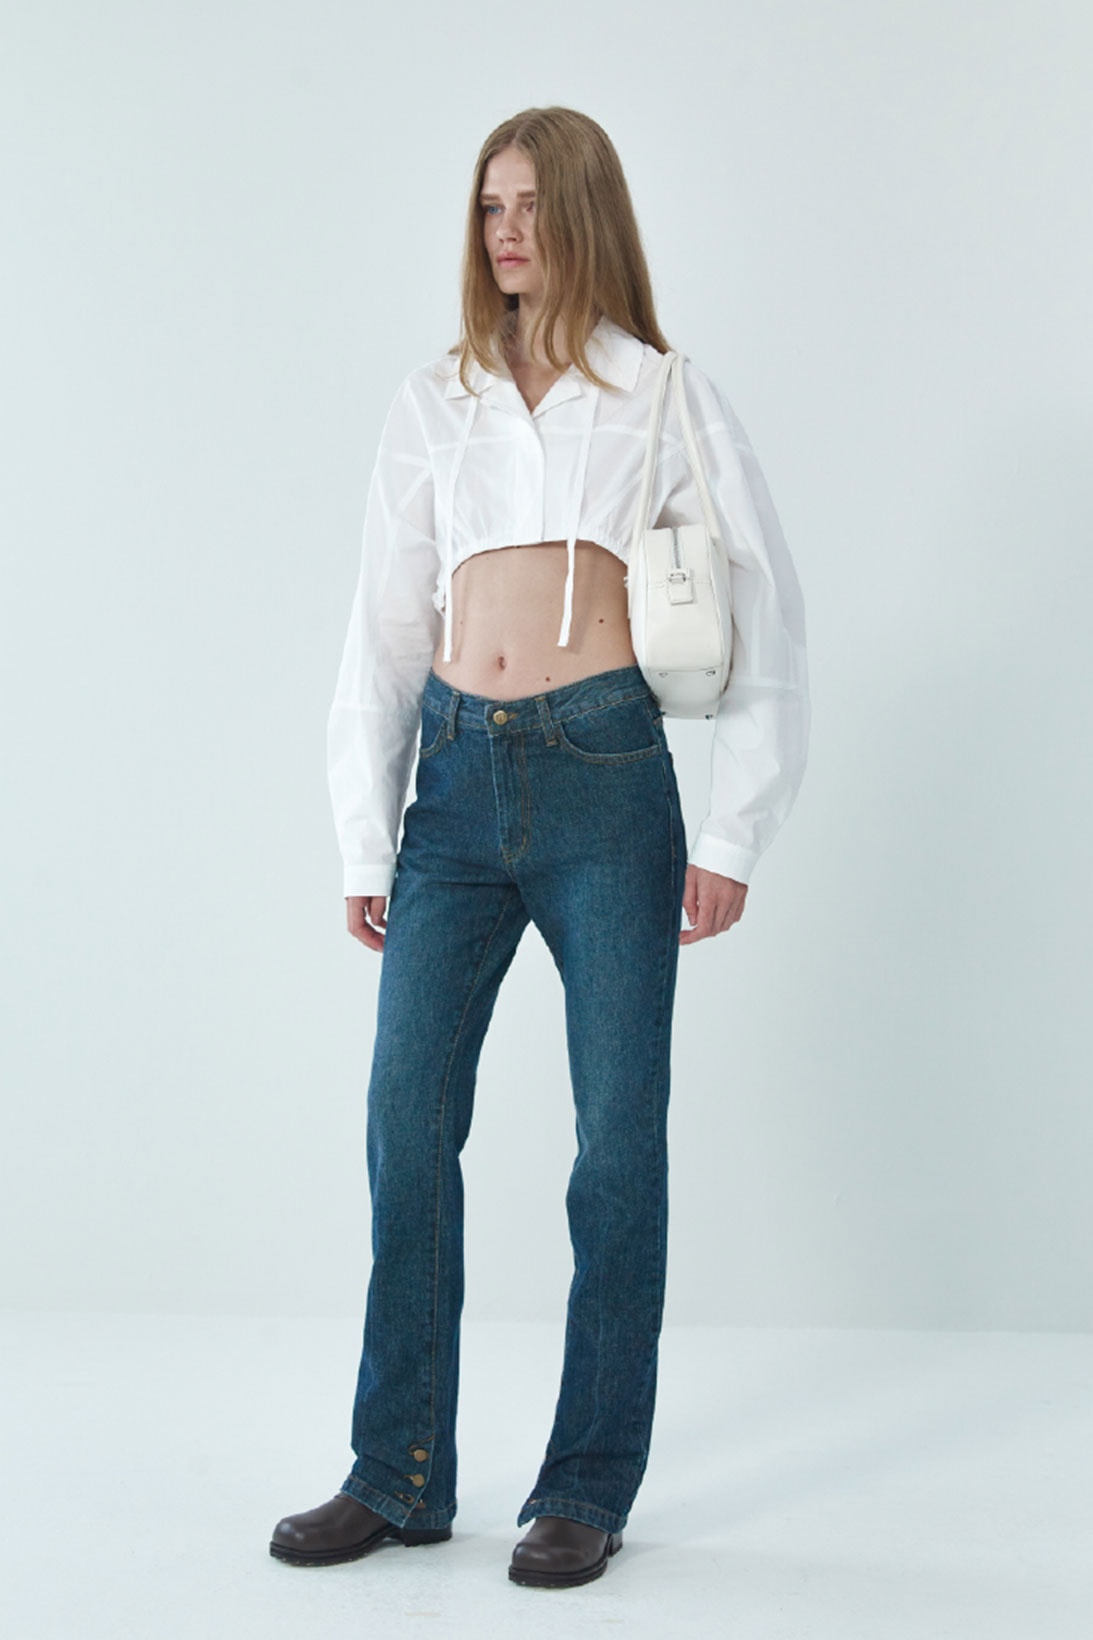 theopen product spring summer 2021 ss21 collection lookbook cropped top jeans pants